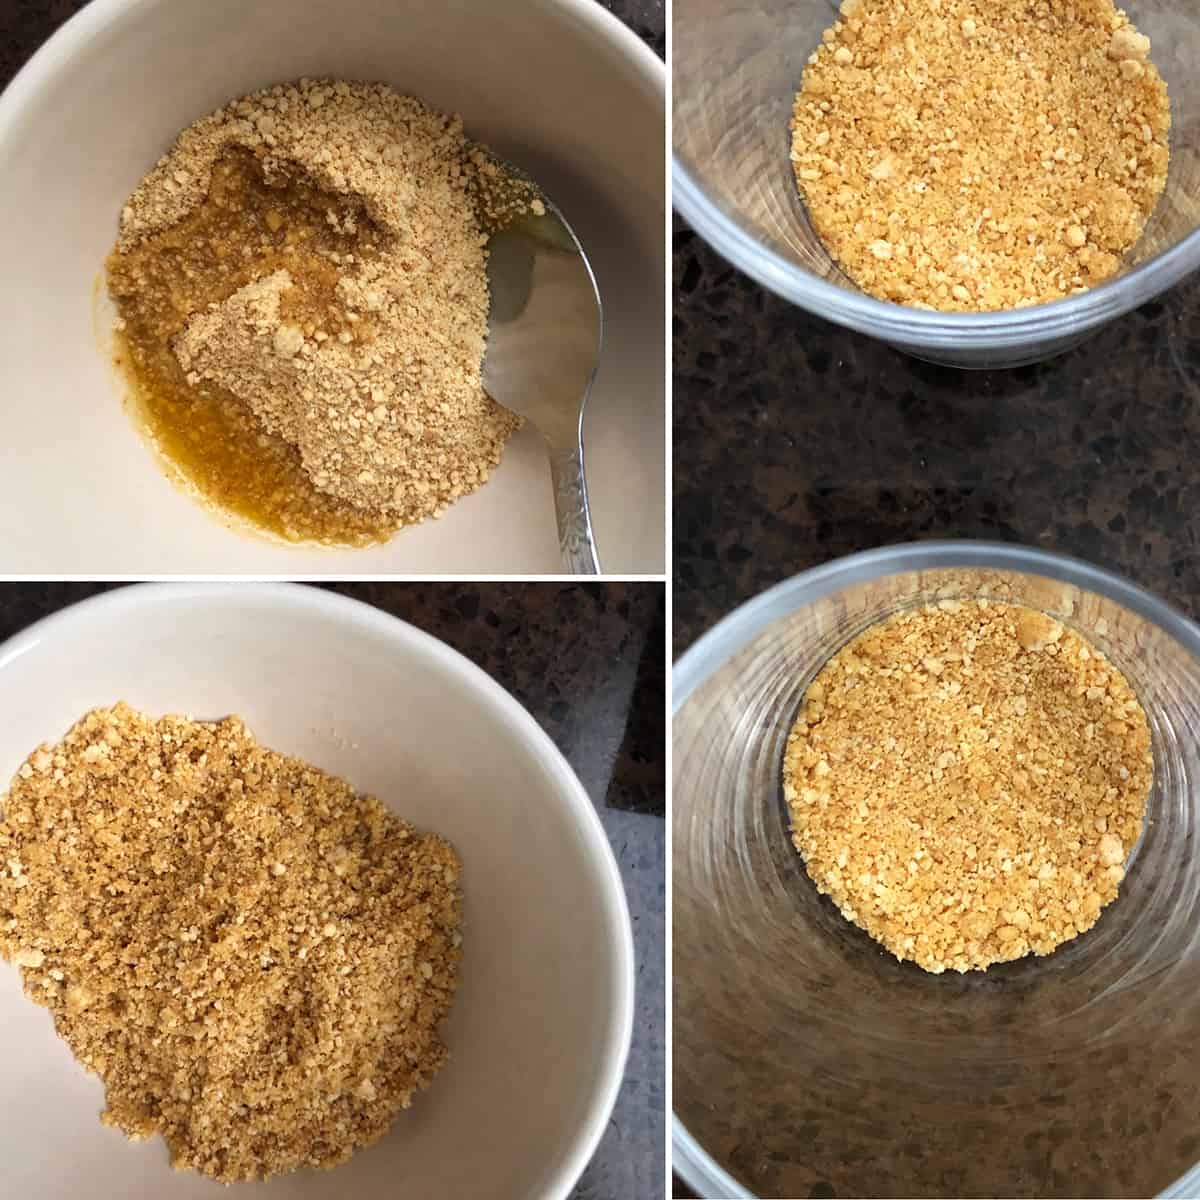 Melted ghee added to graham cracker crumbs. added to glasses to form the crust